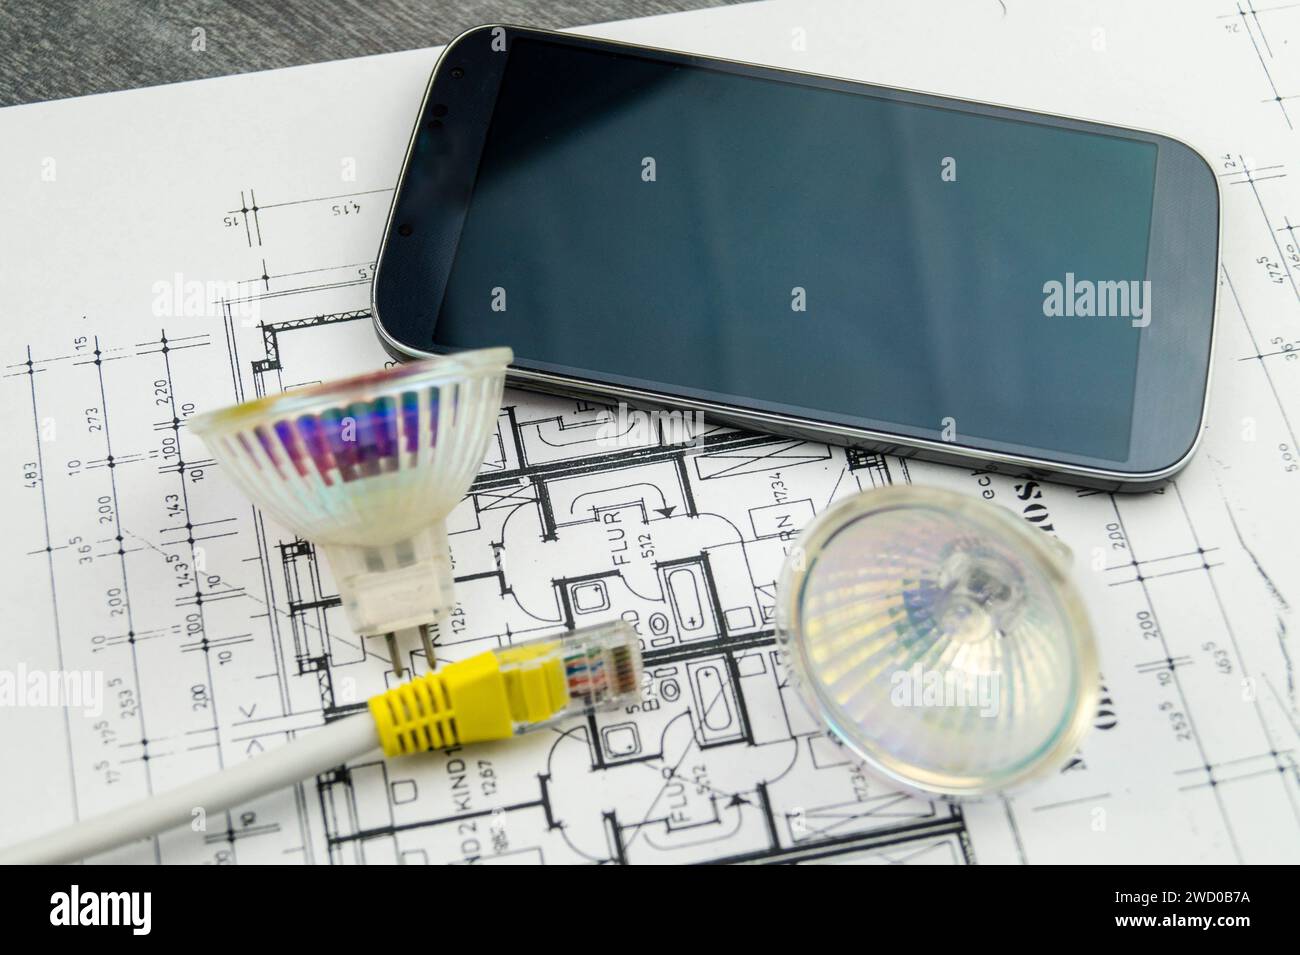 reflector lamps, network cable and smartphone on construction drawing, symbolic image for Smart Home Stock Photo